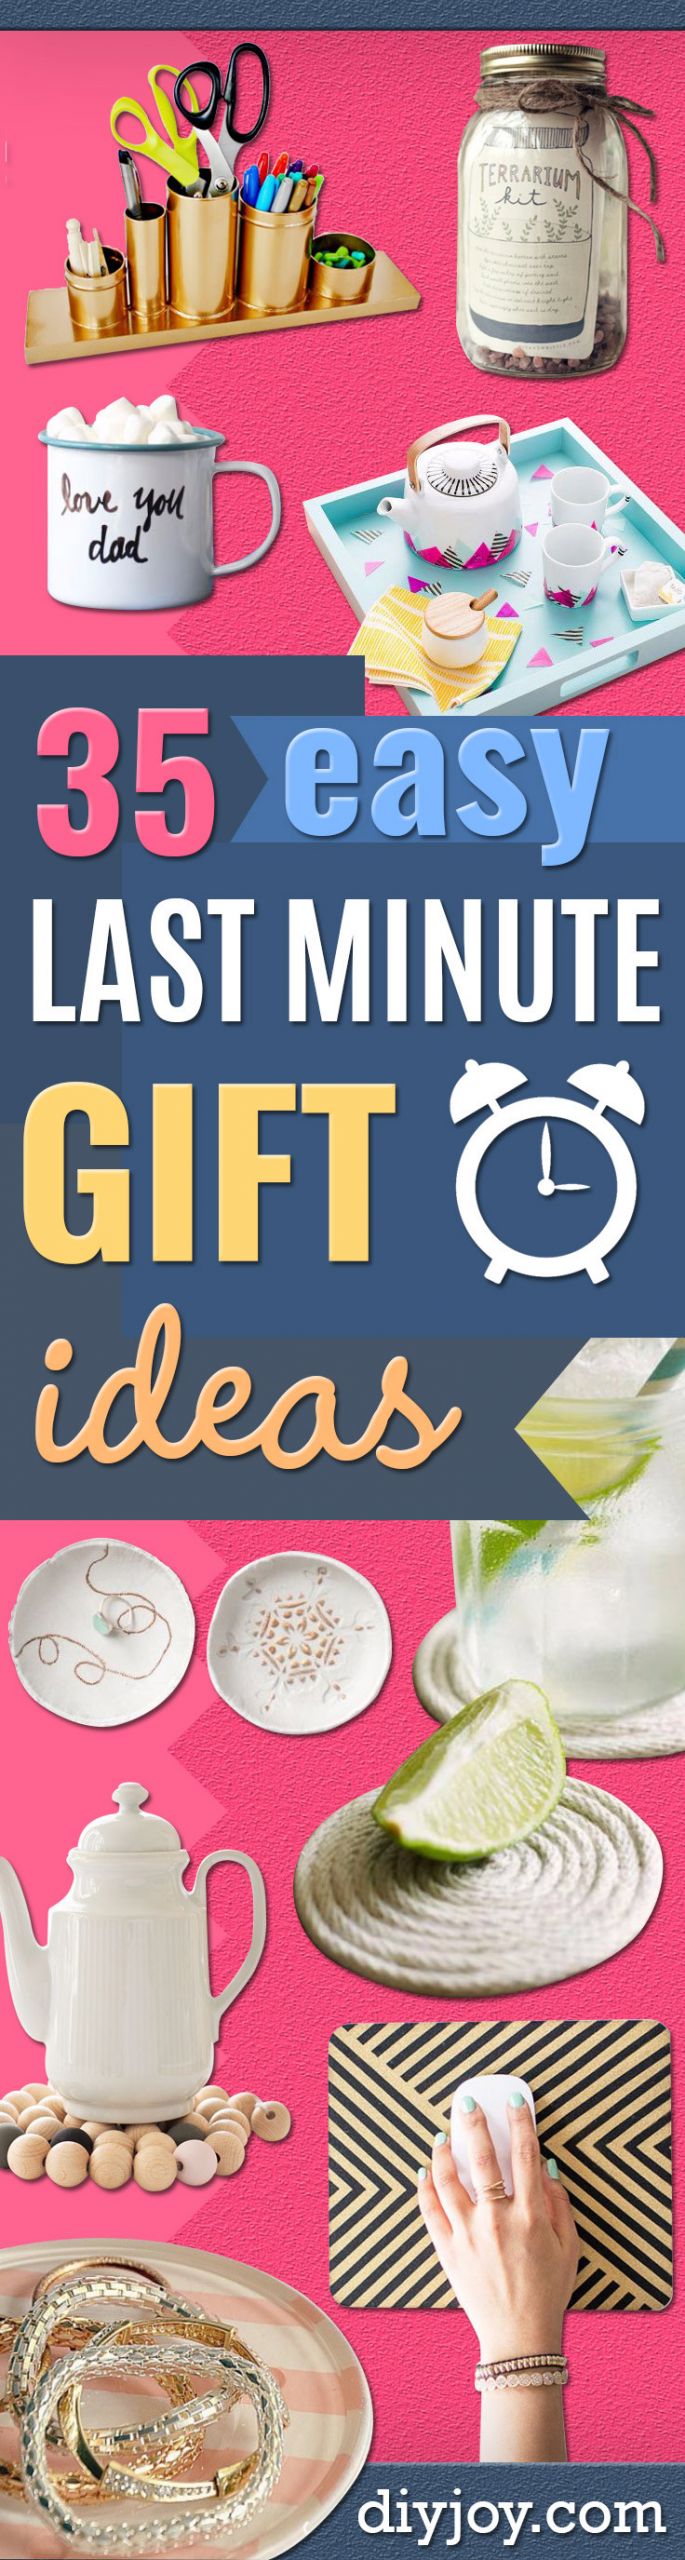 Fast Birthday Gift Ideas
 The 20 Best Ideas for Fast Birthday Gift Ideas Home